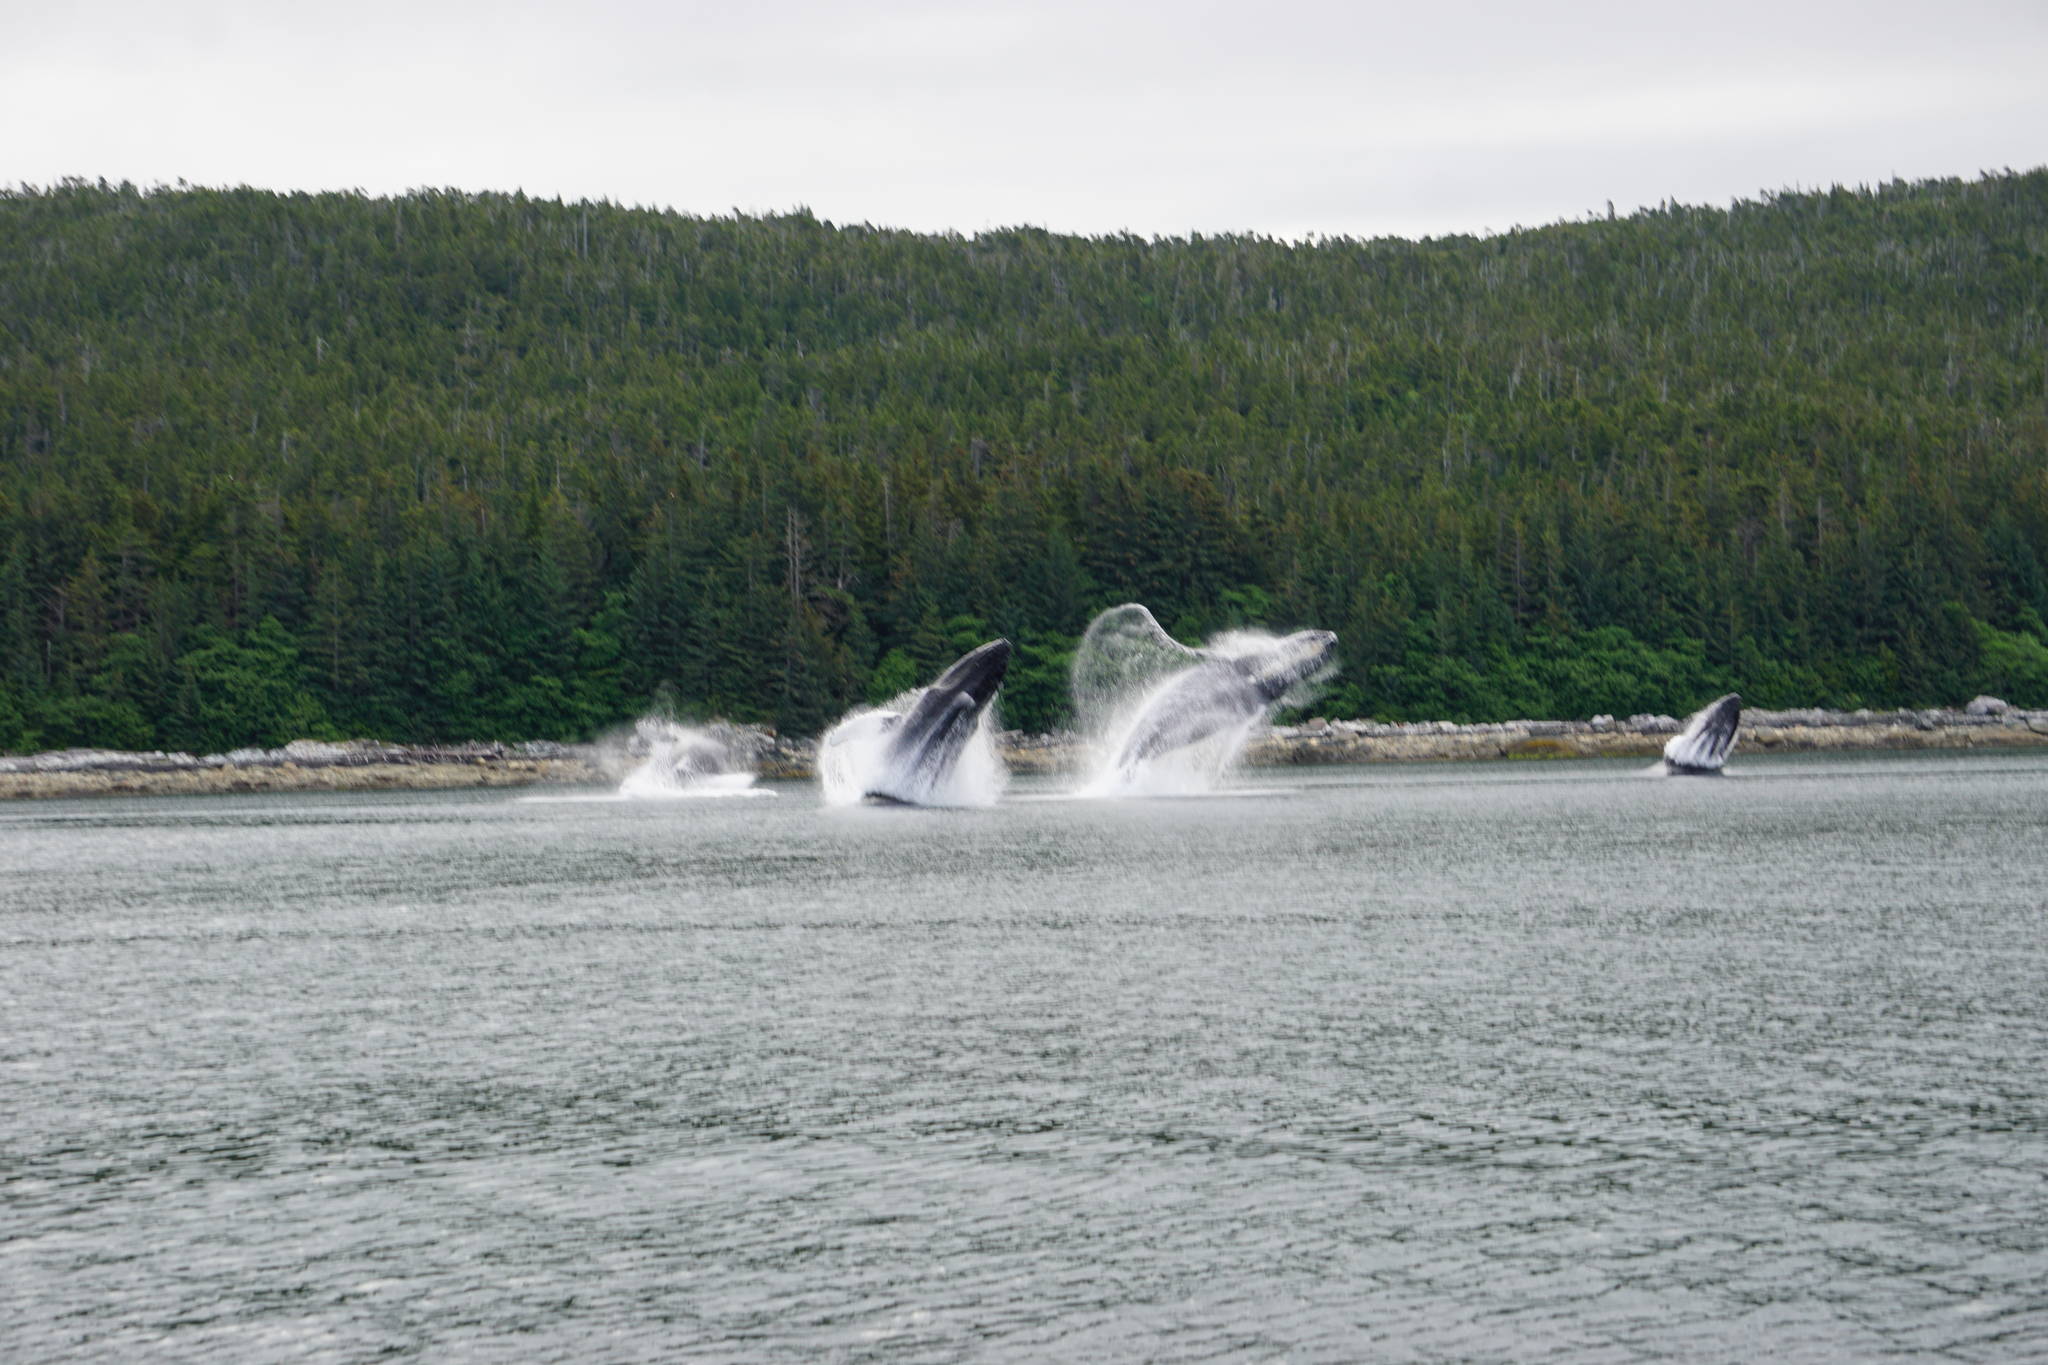 ”I was heading south toward Angoon with my son and grandson when we were treated to this amazing show,” writes Paul Taintor of this photo showing multiple whales breaching. (Courtesy Photo | Paul Taintor)